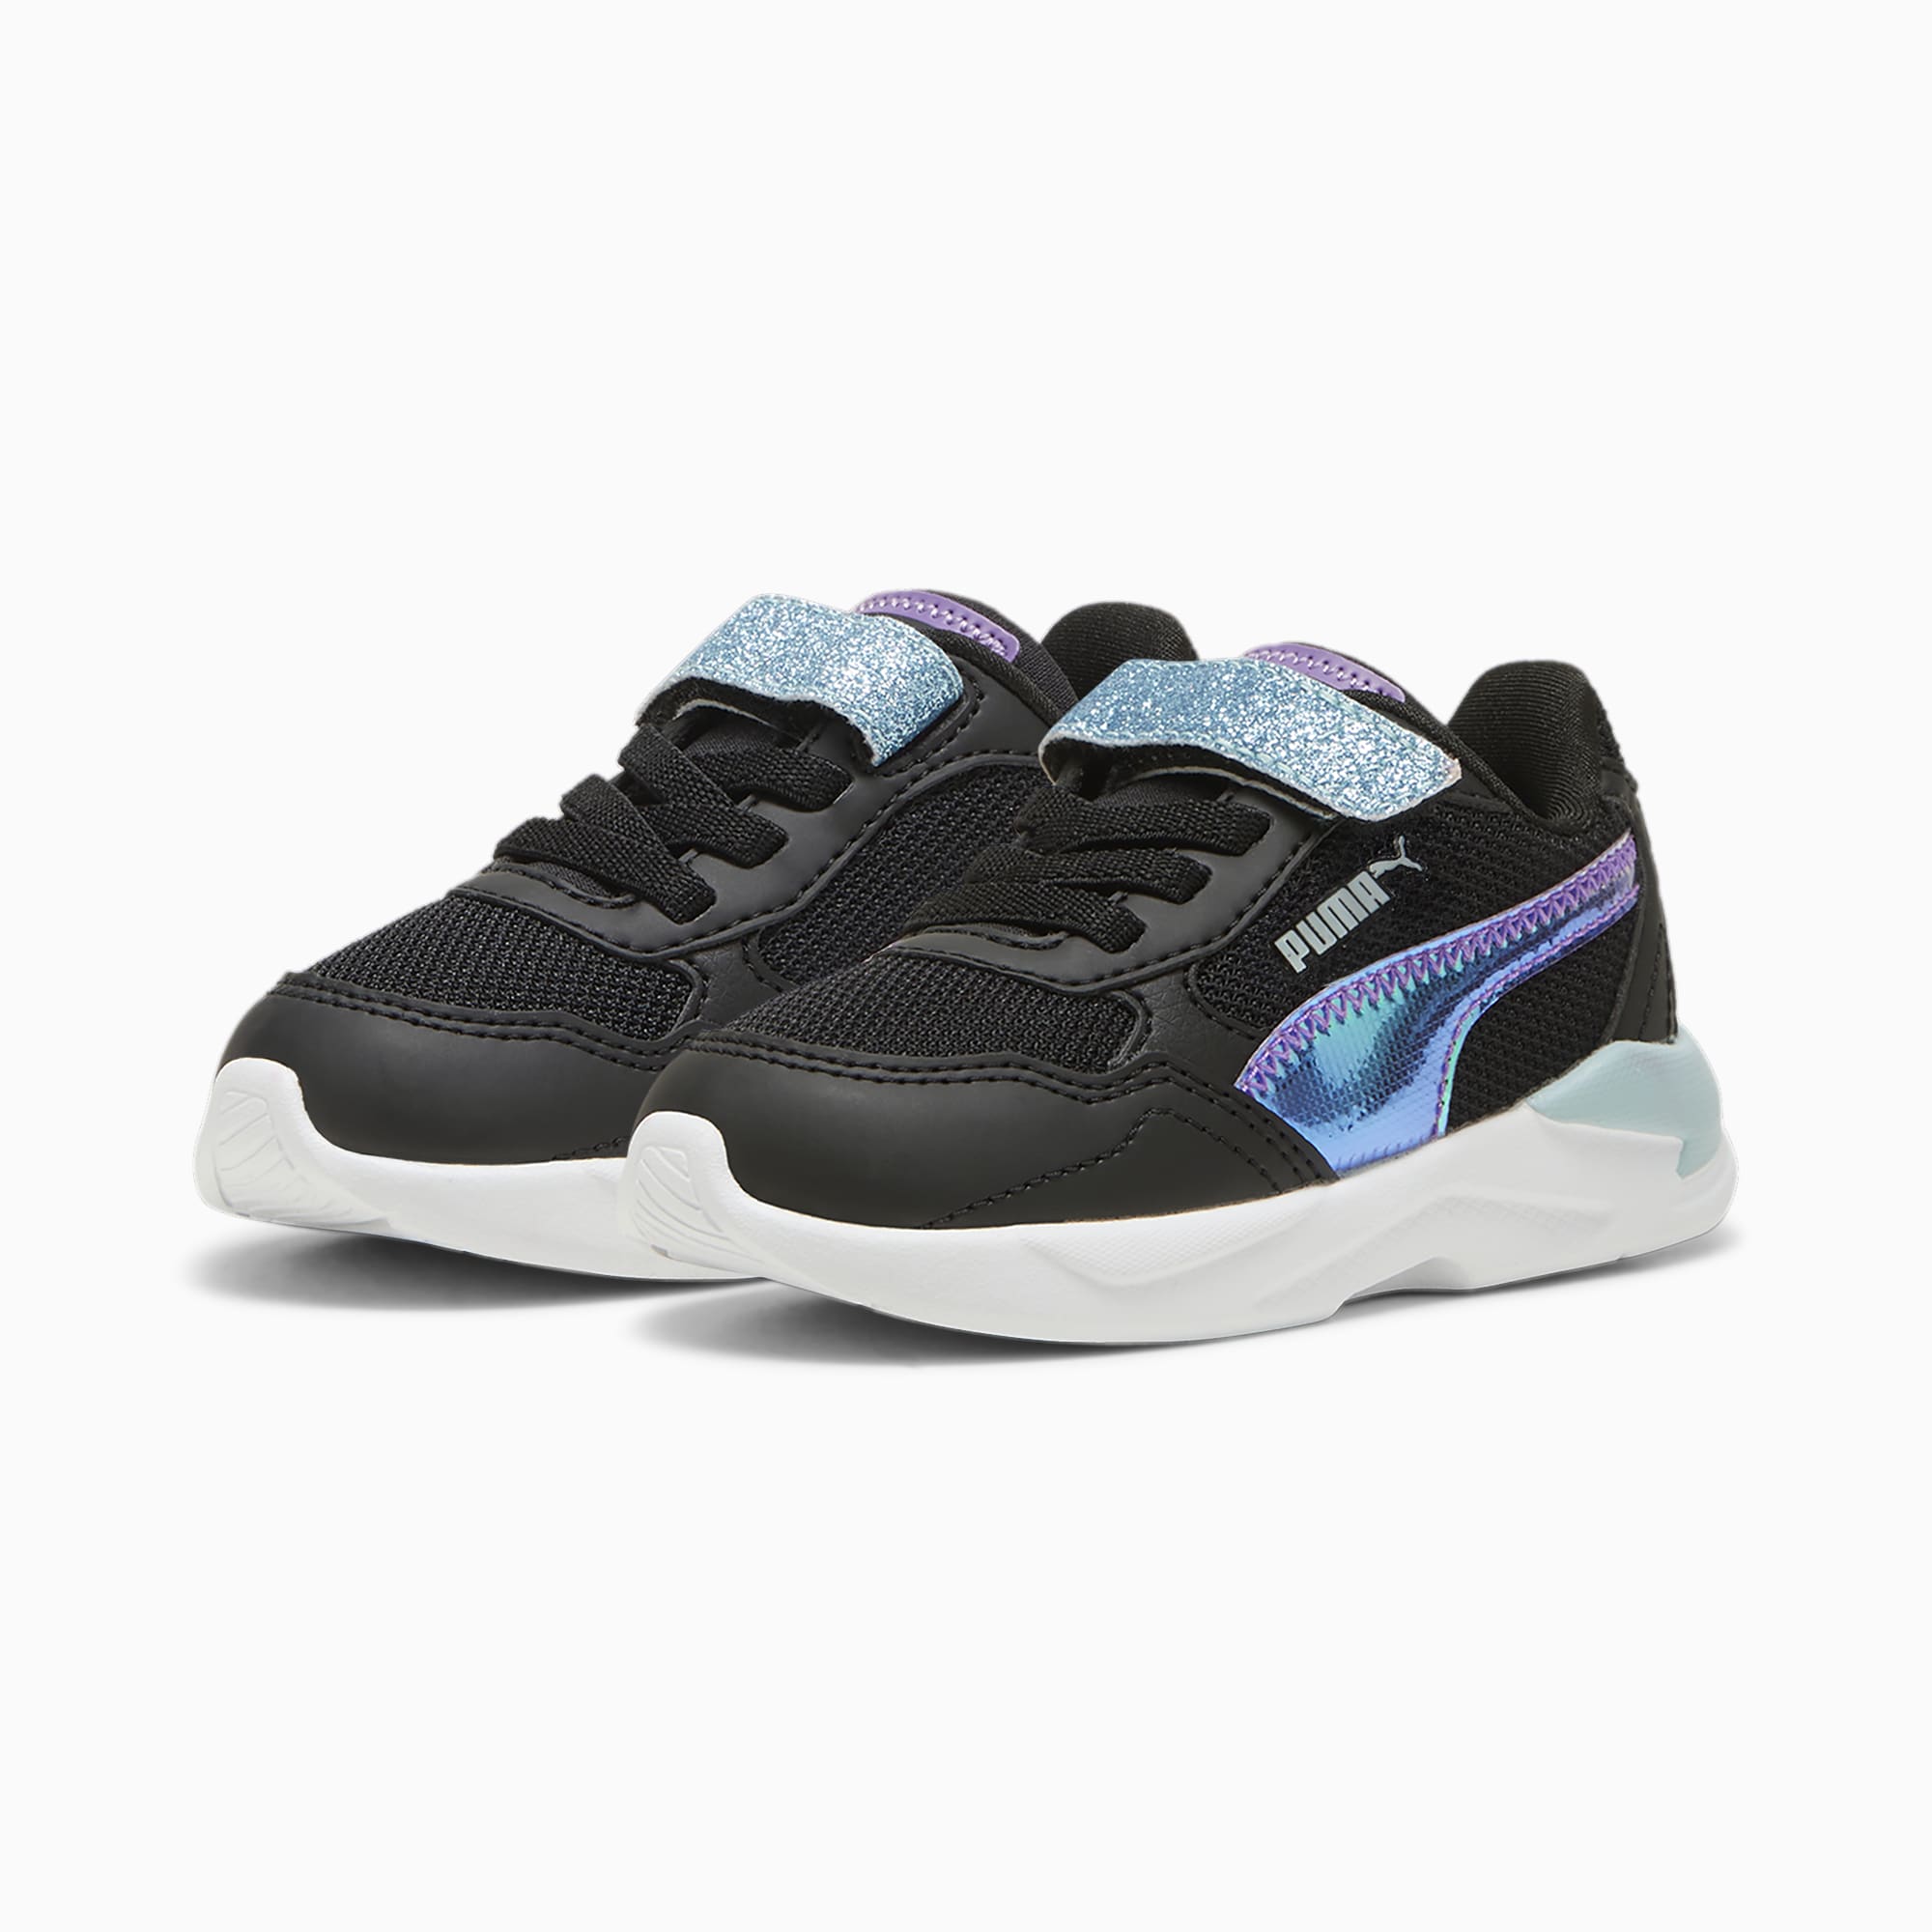 PUMA X-Ray Speedlite Deep Dive Toddlers' Sneakers, Black/Ultraviolet/Turquoise Surf, Size 19, Shoes